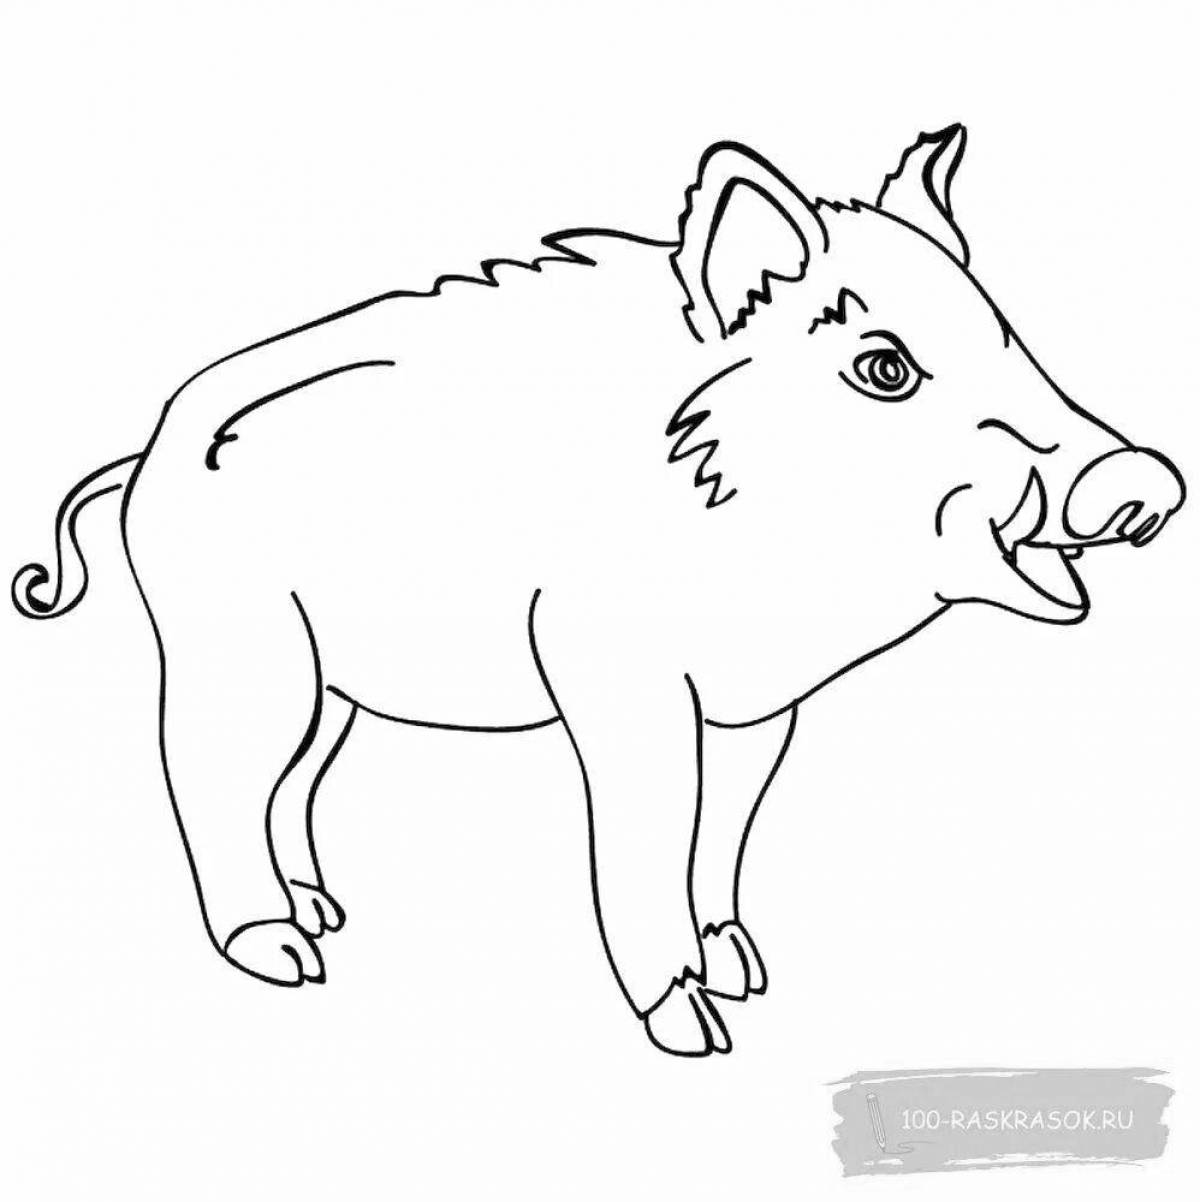 Attractive boar coloring pages for kids